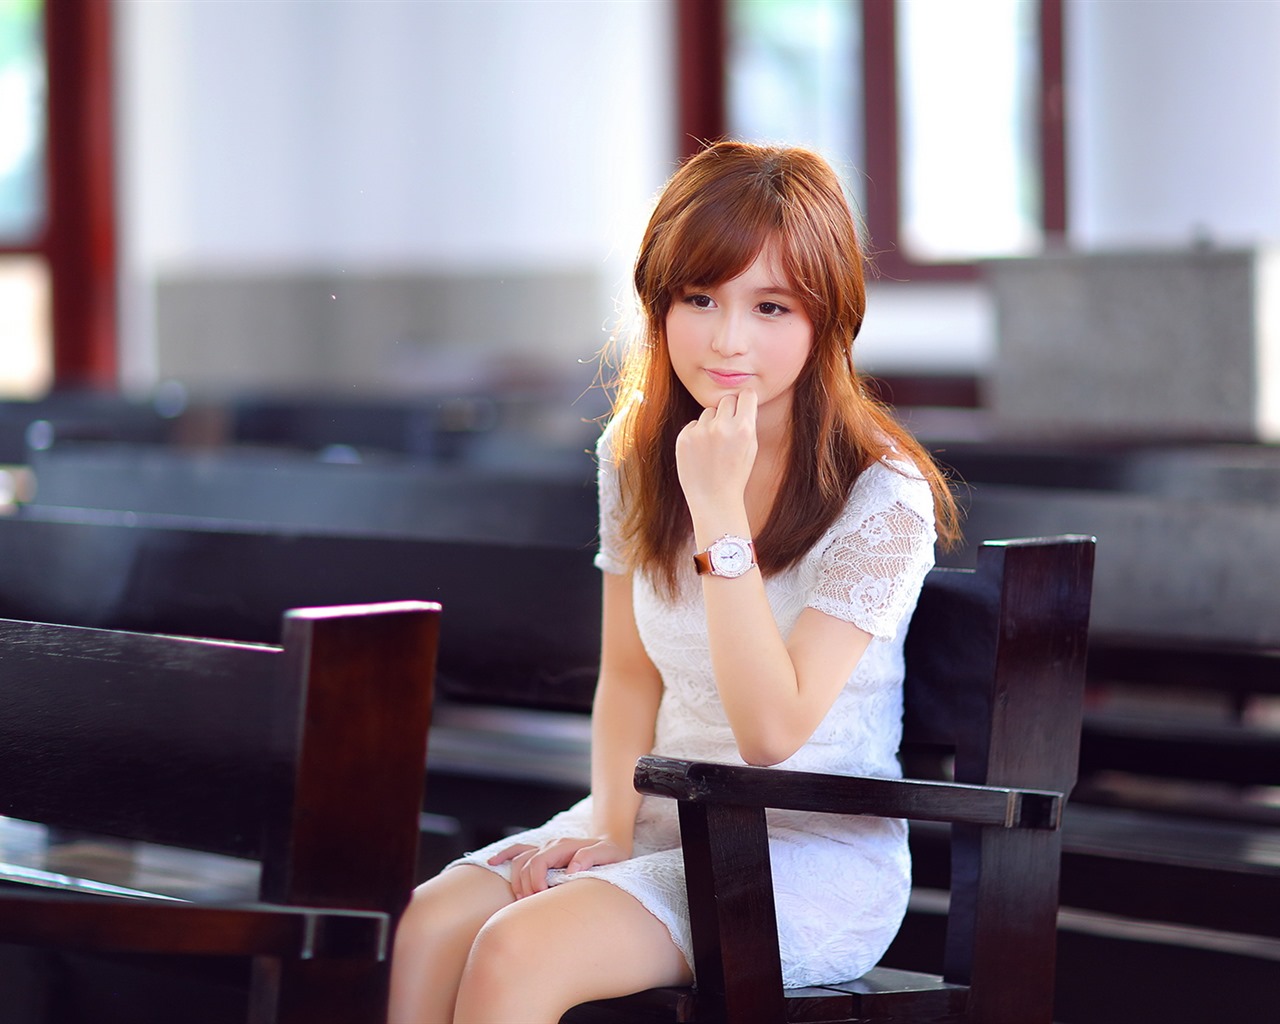 Pure and lovely young Asian girl HD wallpapers collection (2) #37 - 1280x1024